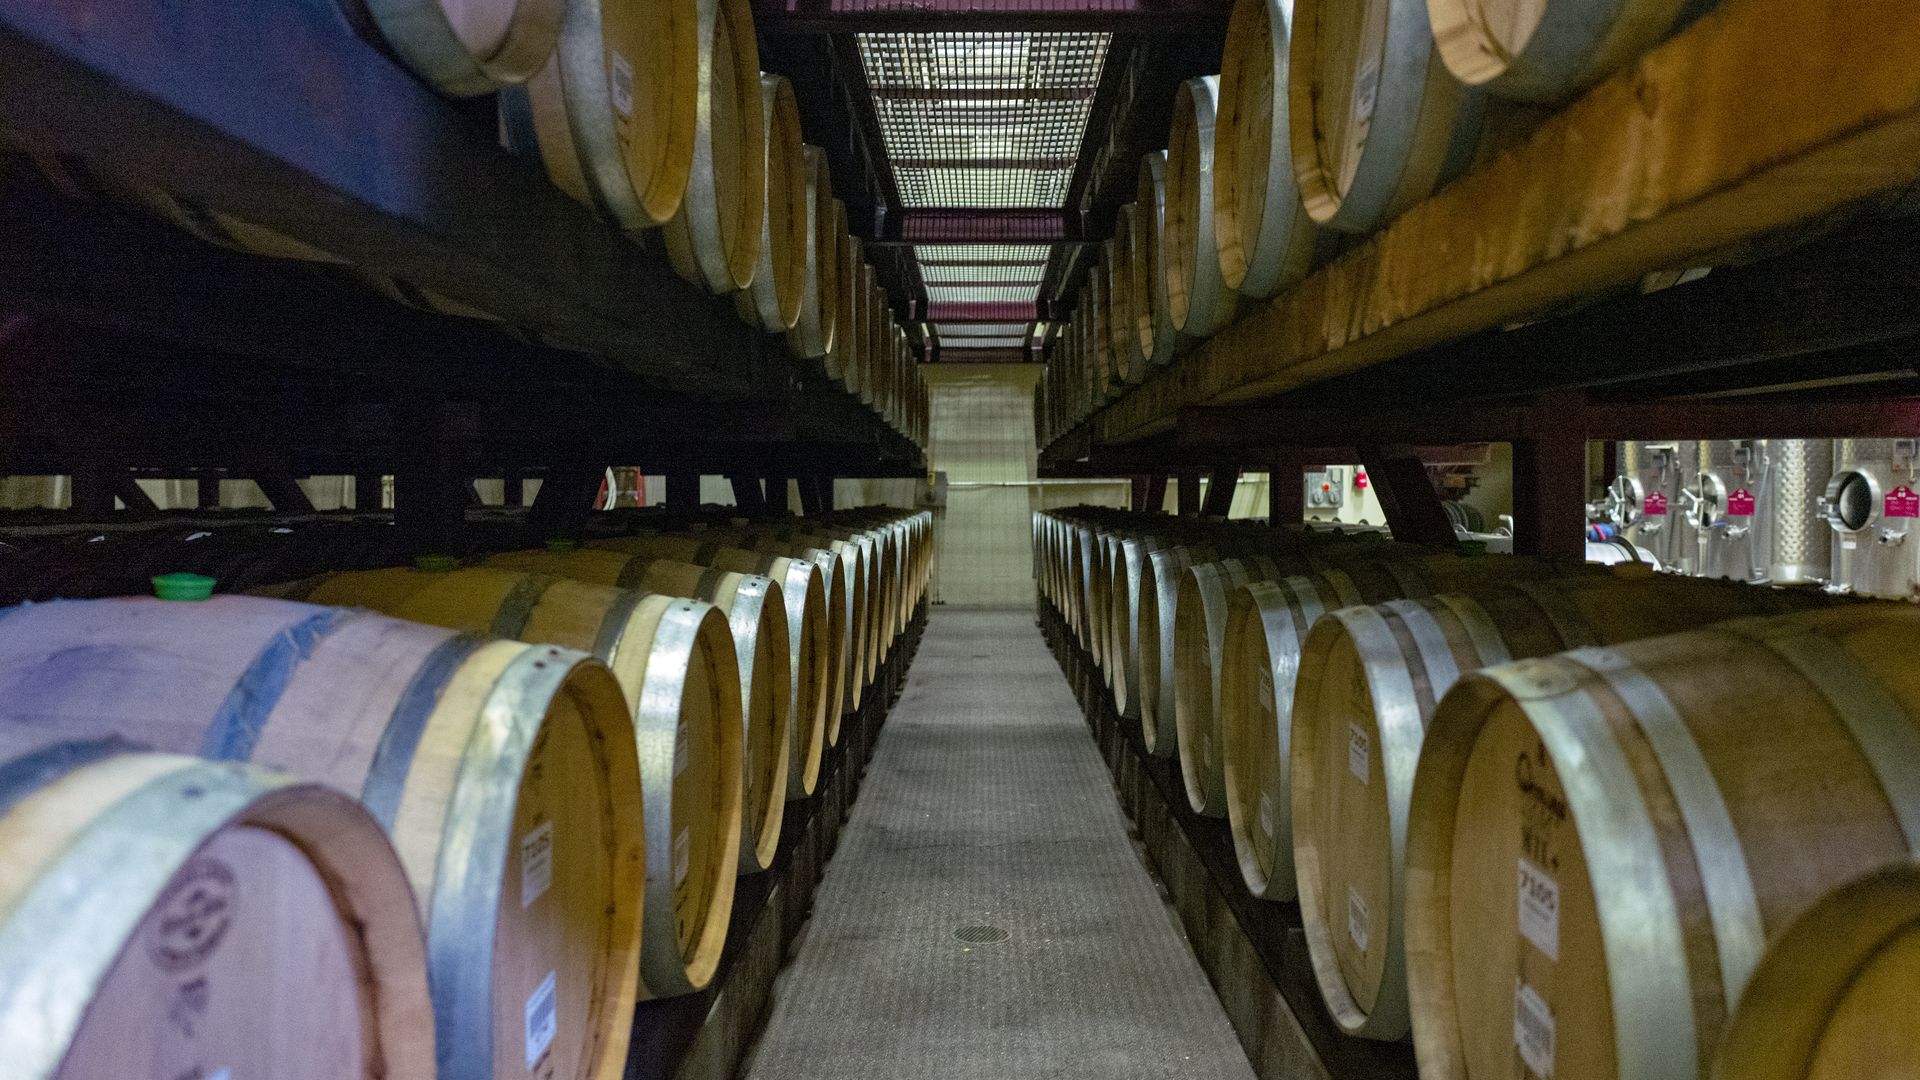 In this image, two rows of wine barrels are stacked on top of each other. 